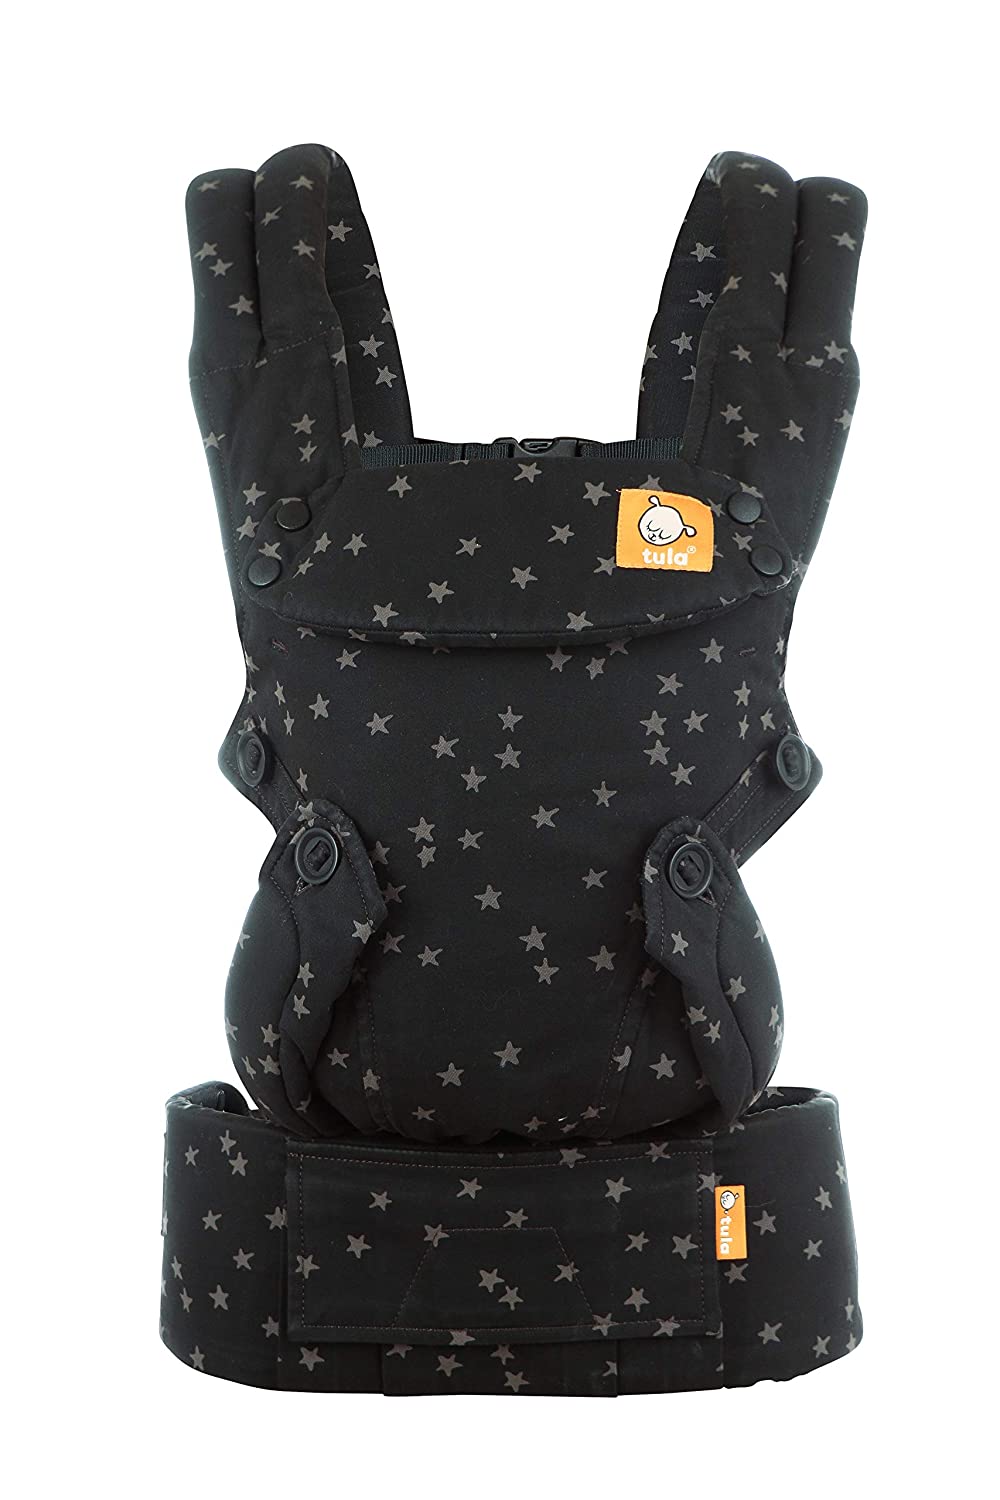 Tula Explore Baby Carrier for Newborns from Birth Ergonomic Baby Carrycot Stomach Carrier Back Carrier